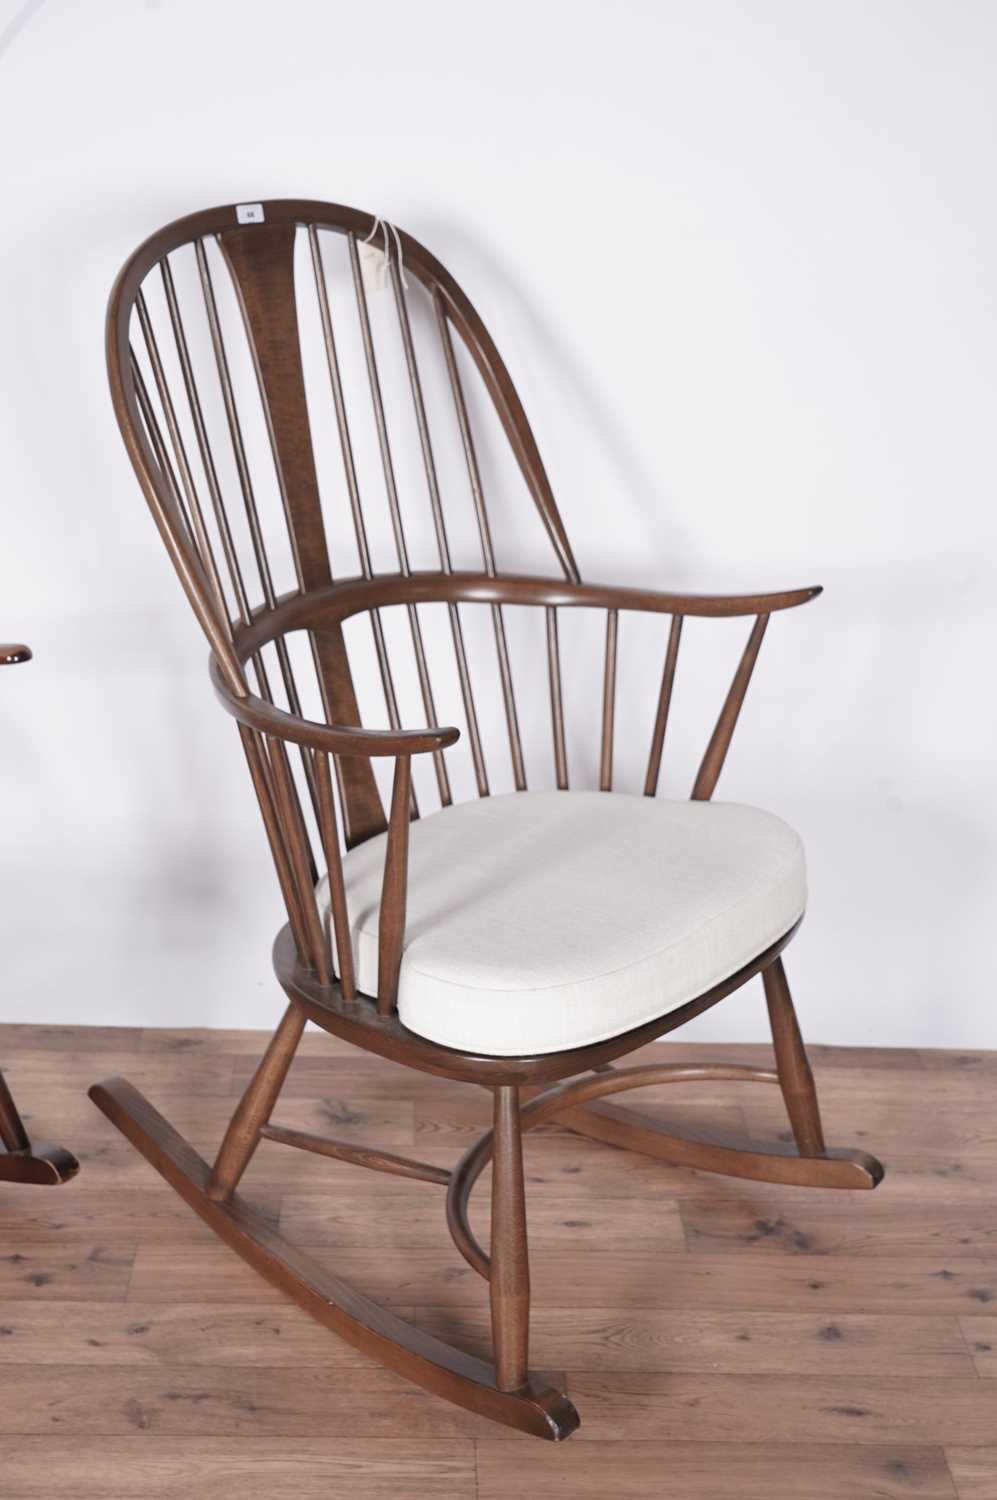 Ercol 'Chairmaker' rocking chair and a Windsor rocking chair - Image 5 of 5